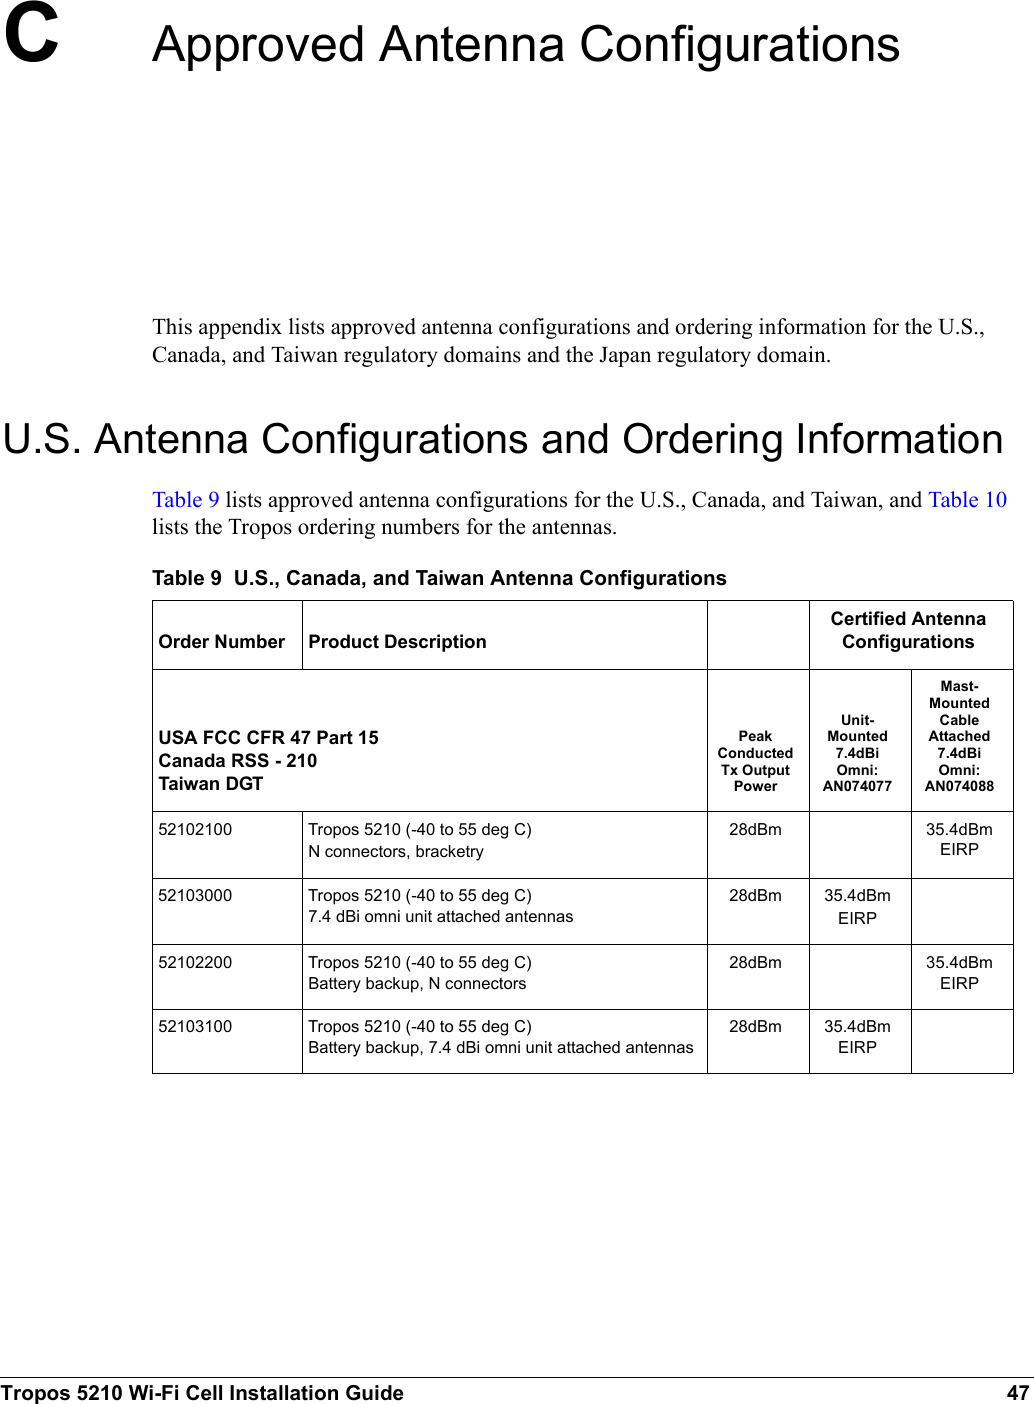 Tropos 5210 Wi-Fi Cell Installation Guide 47CApproved Antenna ConfigurationsThis appendix lists approved antenna configurations and ordering information for the U.S., Canada, and Taiwan regulatory domains and the Japan regulatory domain.U.S. Antenna Configurations and Ordering InformationTable 9 lists approved antenna configurations for the U.S., Canada, and Taiwan, and Table 10 lists the Tropos ordering numbers for the antennas. Table 9  U.S., Canada, and Taiwan Antenna ConfigurationsOrder Number Product DescriptionCertified Antenna ConfigurationsUSA FCC CFR 47 Part 15Canada RSS - 210Taiwan DGTPeak Conducted Tx Output PowerUnit-Mounted 7.4dBi Omni: AN074077Mast-Mounted Cable Attached 7.4dBi Omni: AN07408852102100 Tropos 5210 (-40 to 55 deg C)N connectors, bracketry28dBm 35.4dBmEIRP52103000 Tropos 5210 (-40 to 55 deg C)7.4 dBi omni unit attached antennas28dBm 35.4dBmEIRP52102200 Tropos 5210 (-40 to 55 deg C)Battery backup, N connectors28dBm 35.4dBmEIRP52103100 Tropos 5210 (-40 to 55 deg C)Battery backup, 7.4 dBi omni unit attached antennas28dBm 35.4dBmEIRP